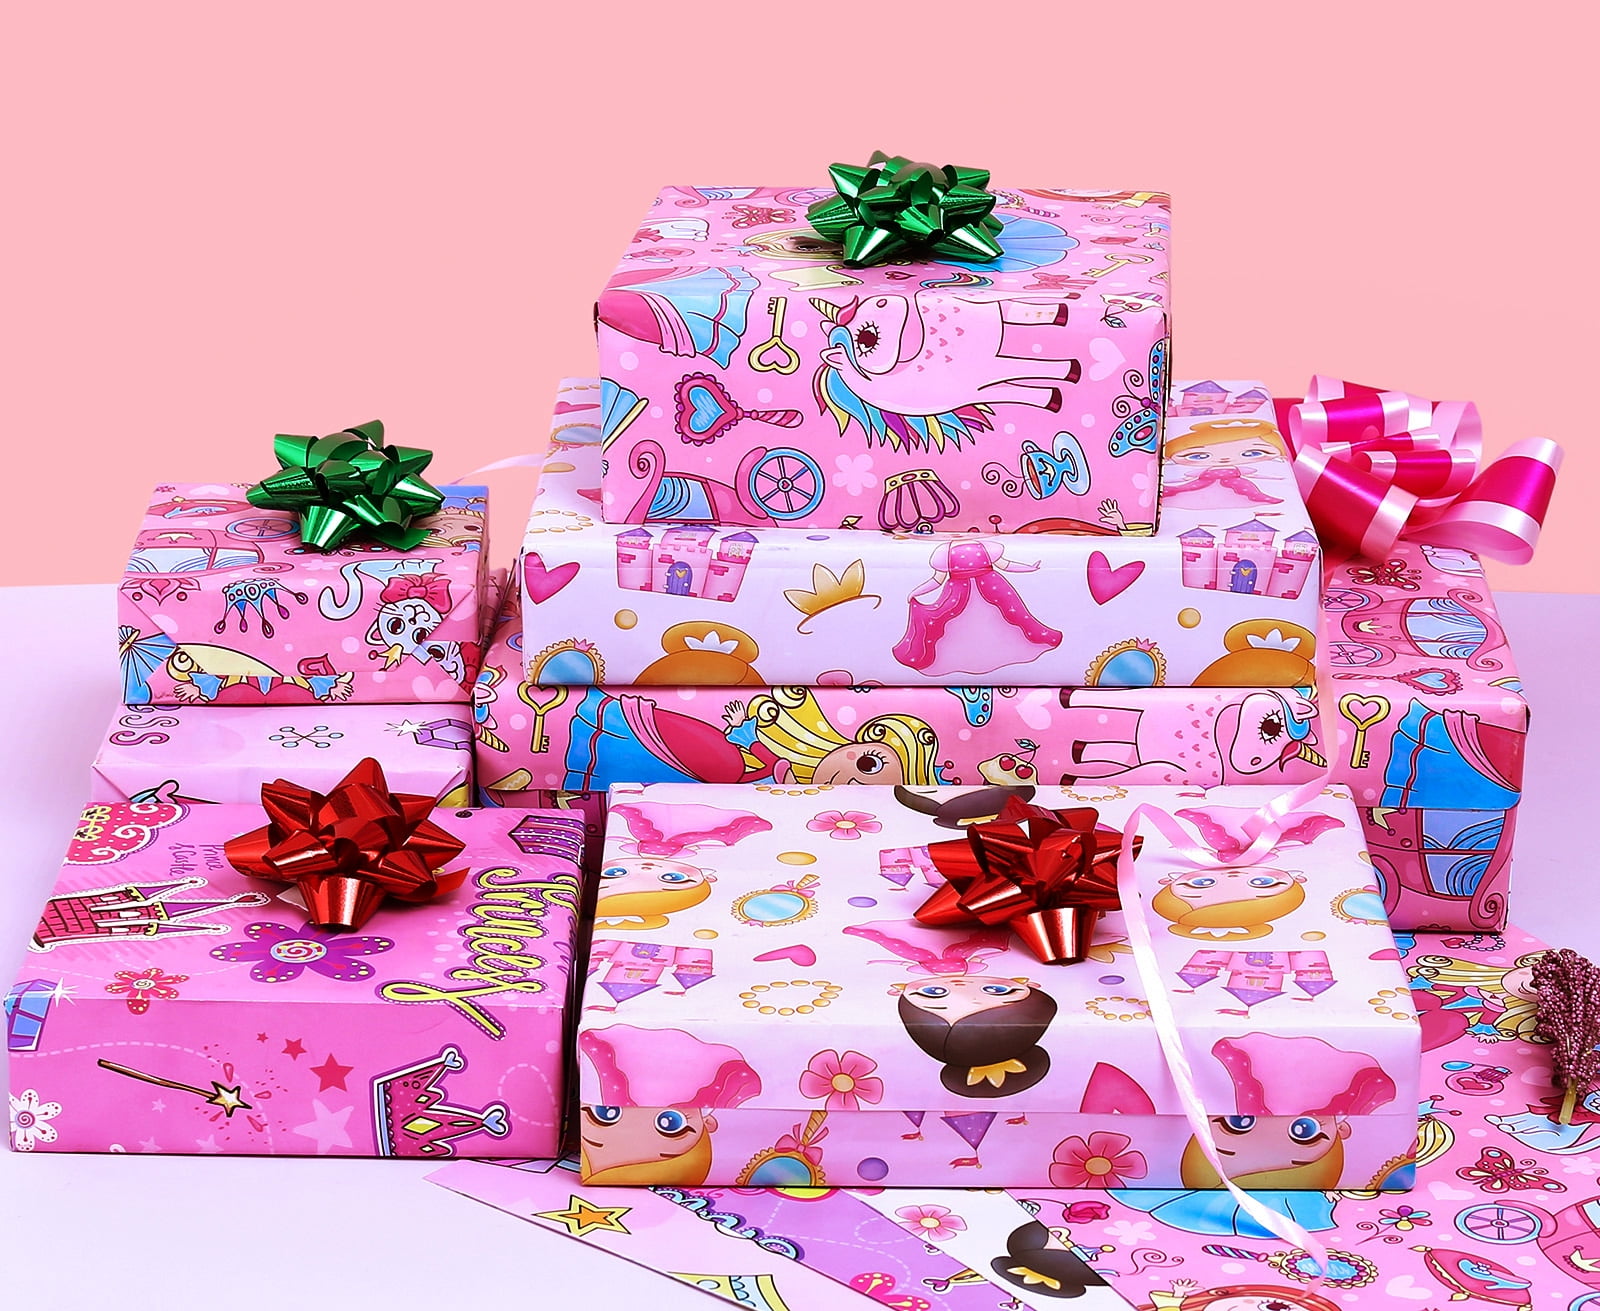 Buy Hugs Pink Birthday Wrapping Paper - 24 Sheets for GBP 3.99